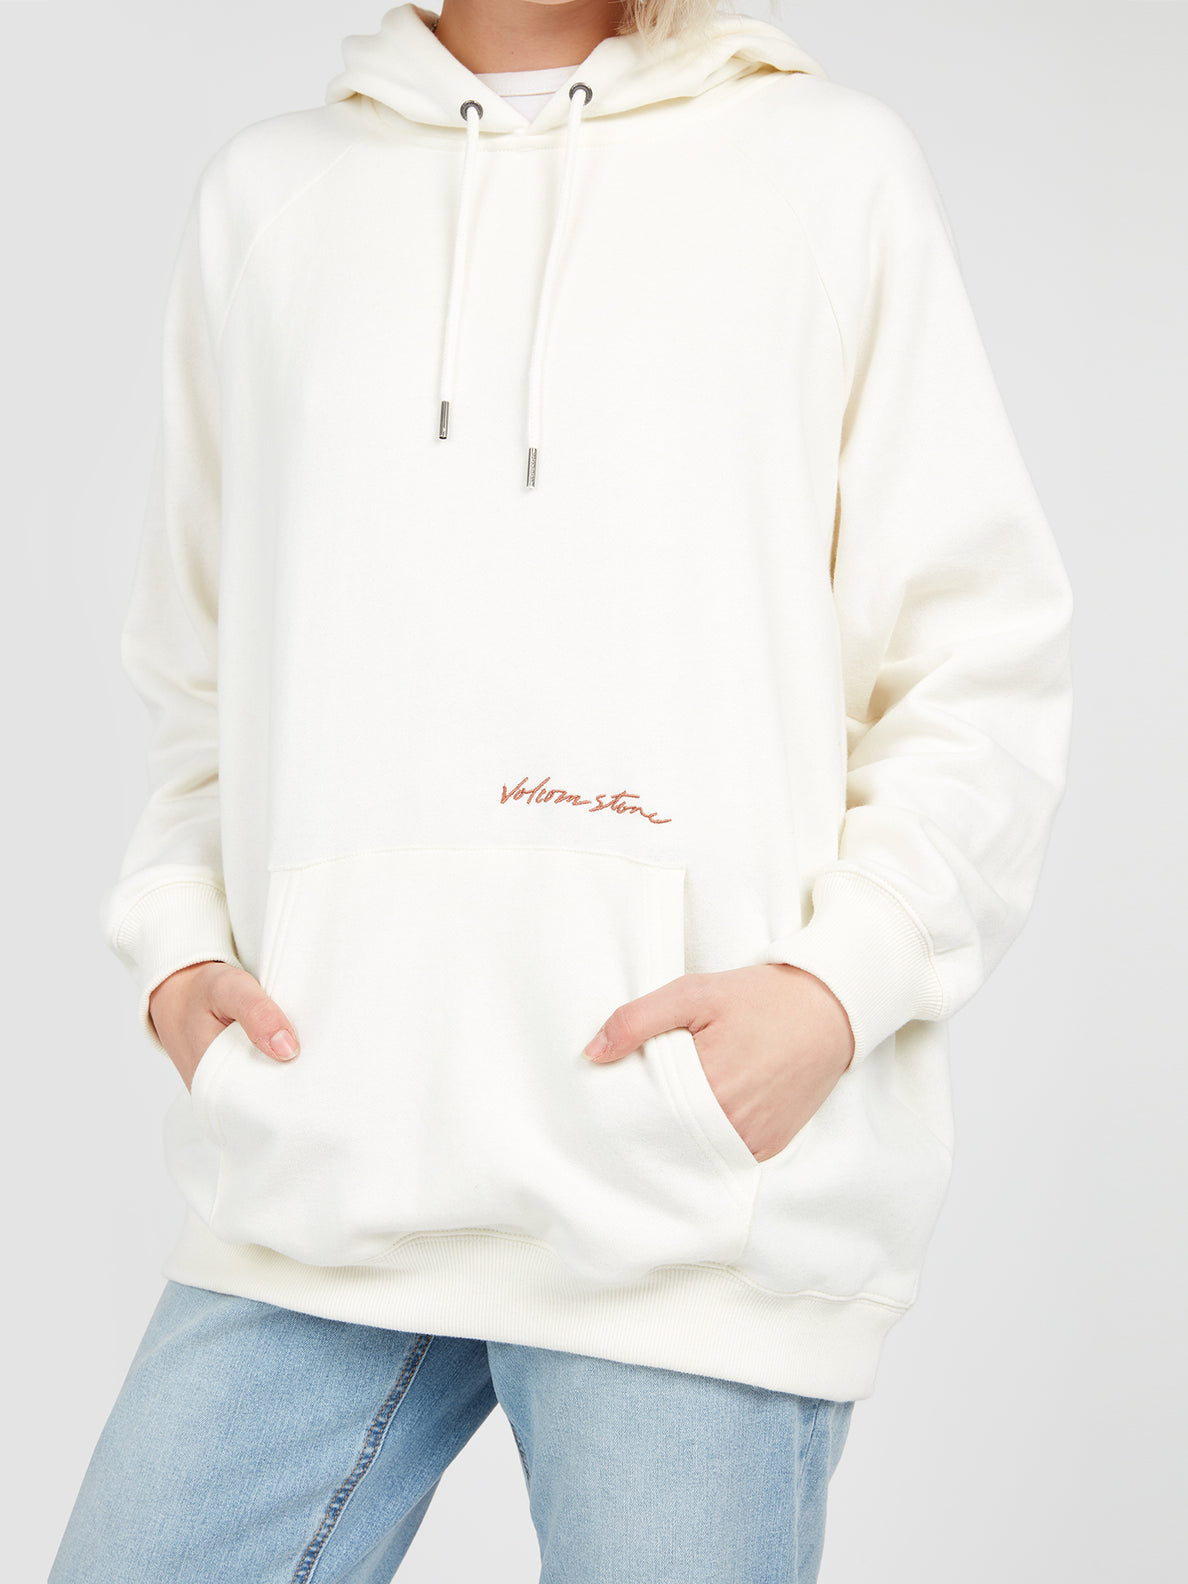 Truly Stoked Hoodie - STAR WHITE